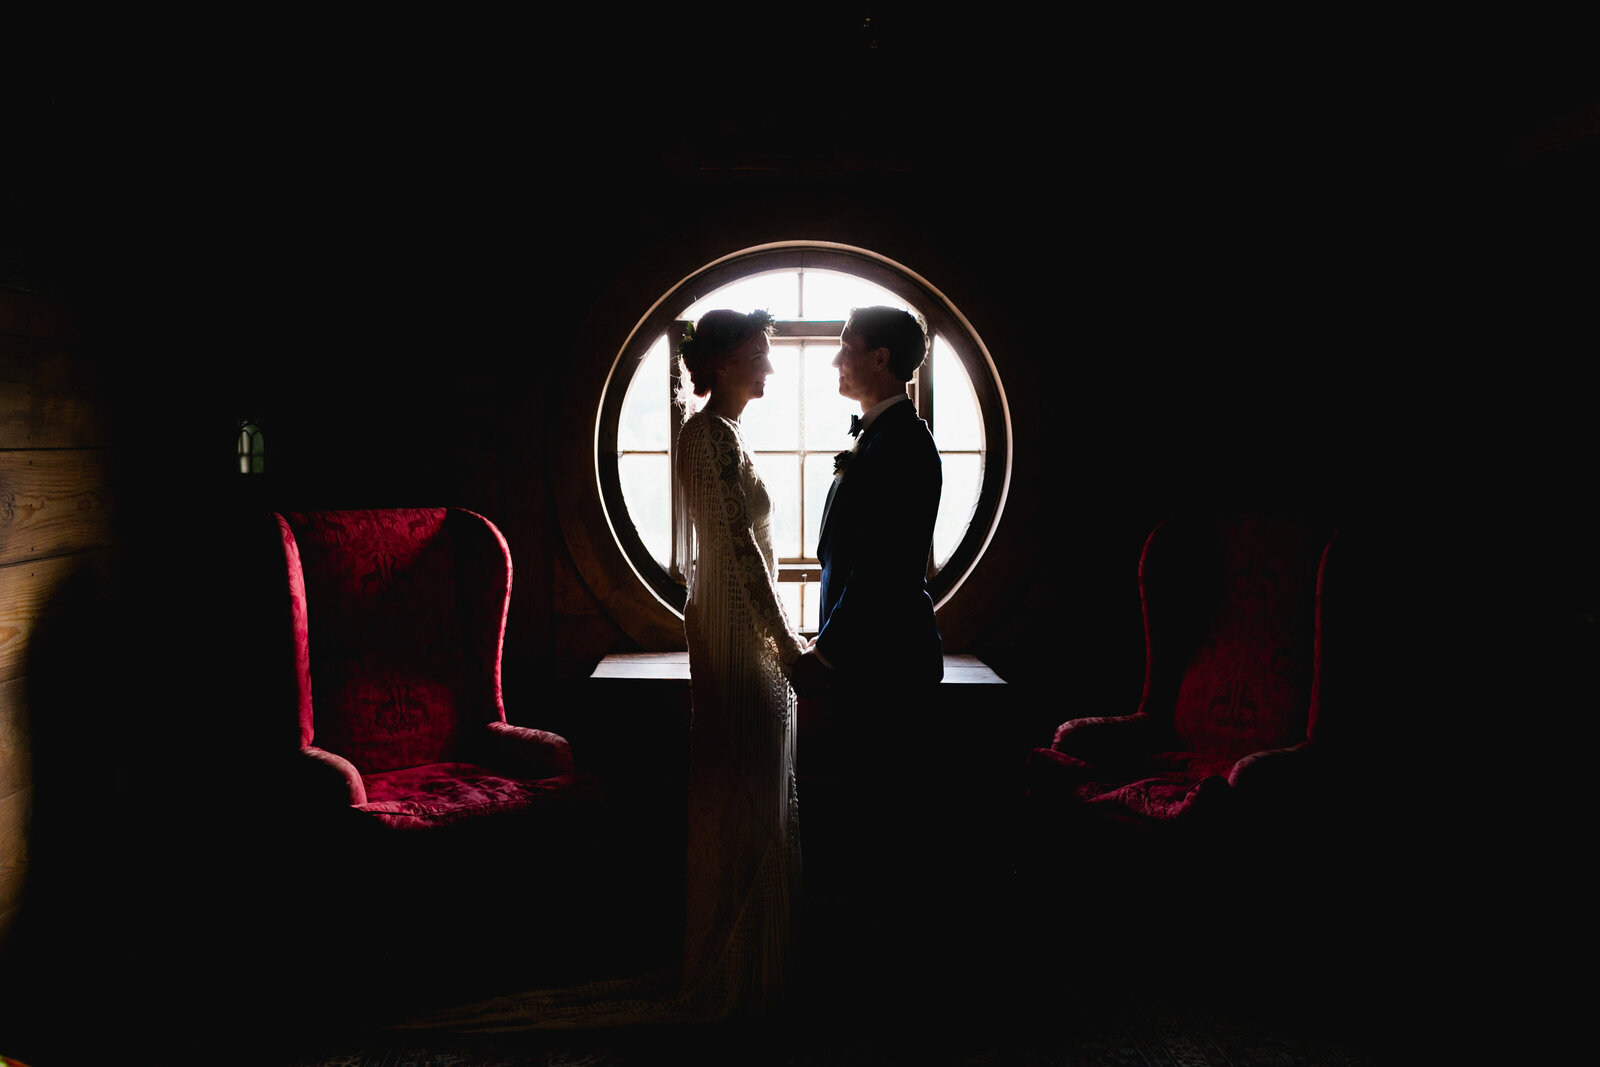 bride and groom silhouetted in window